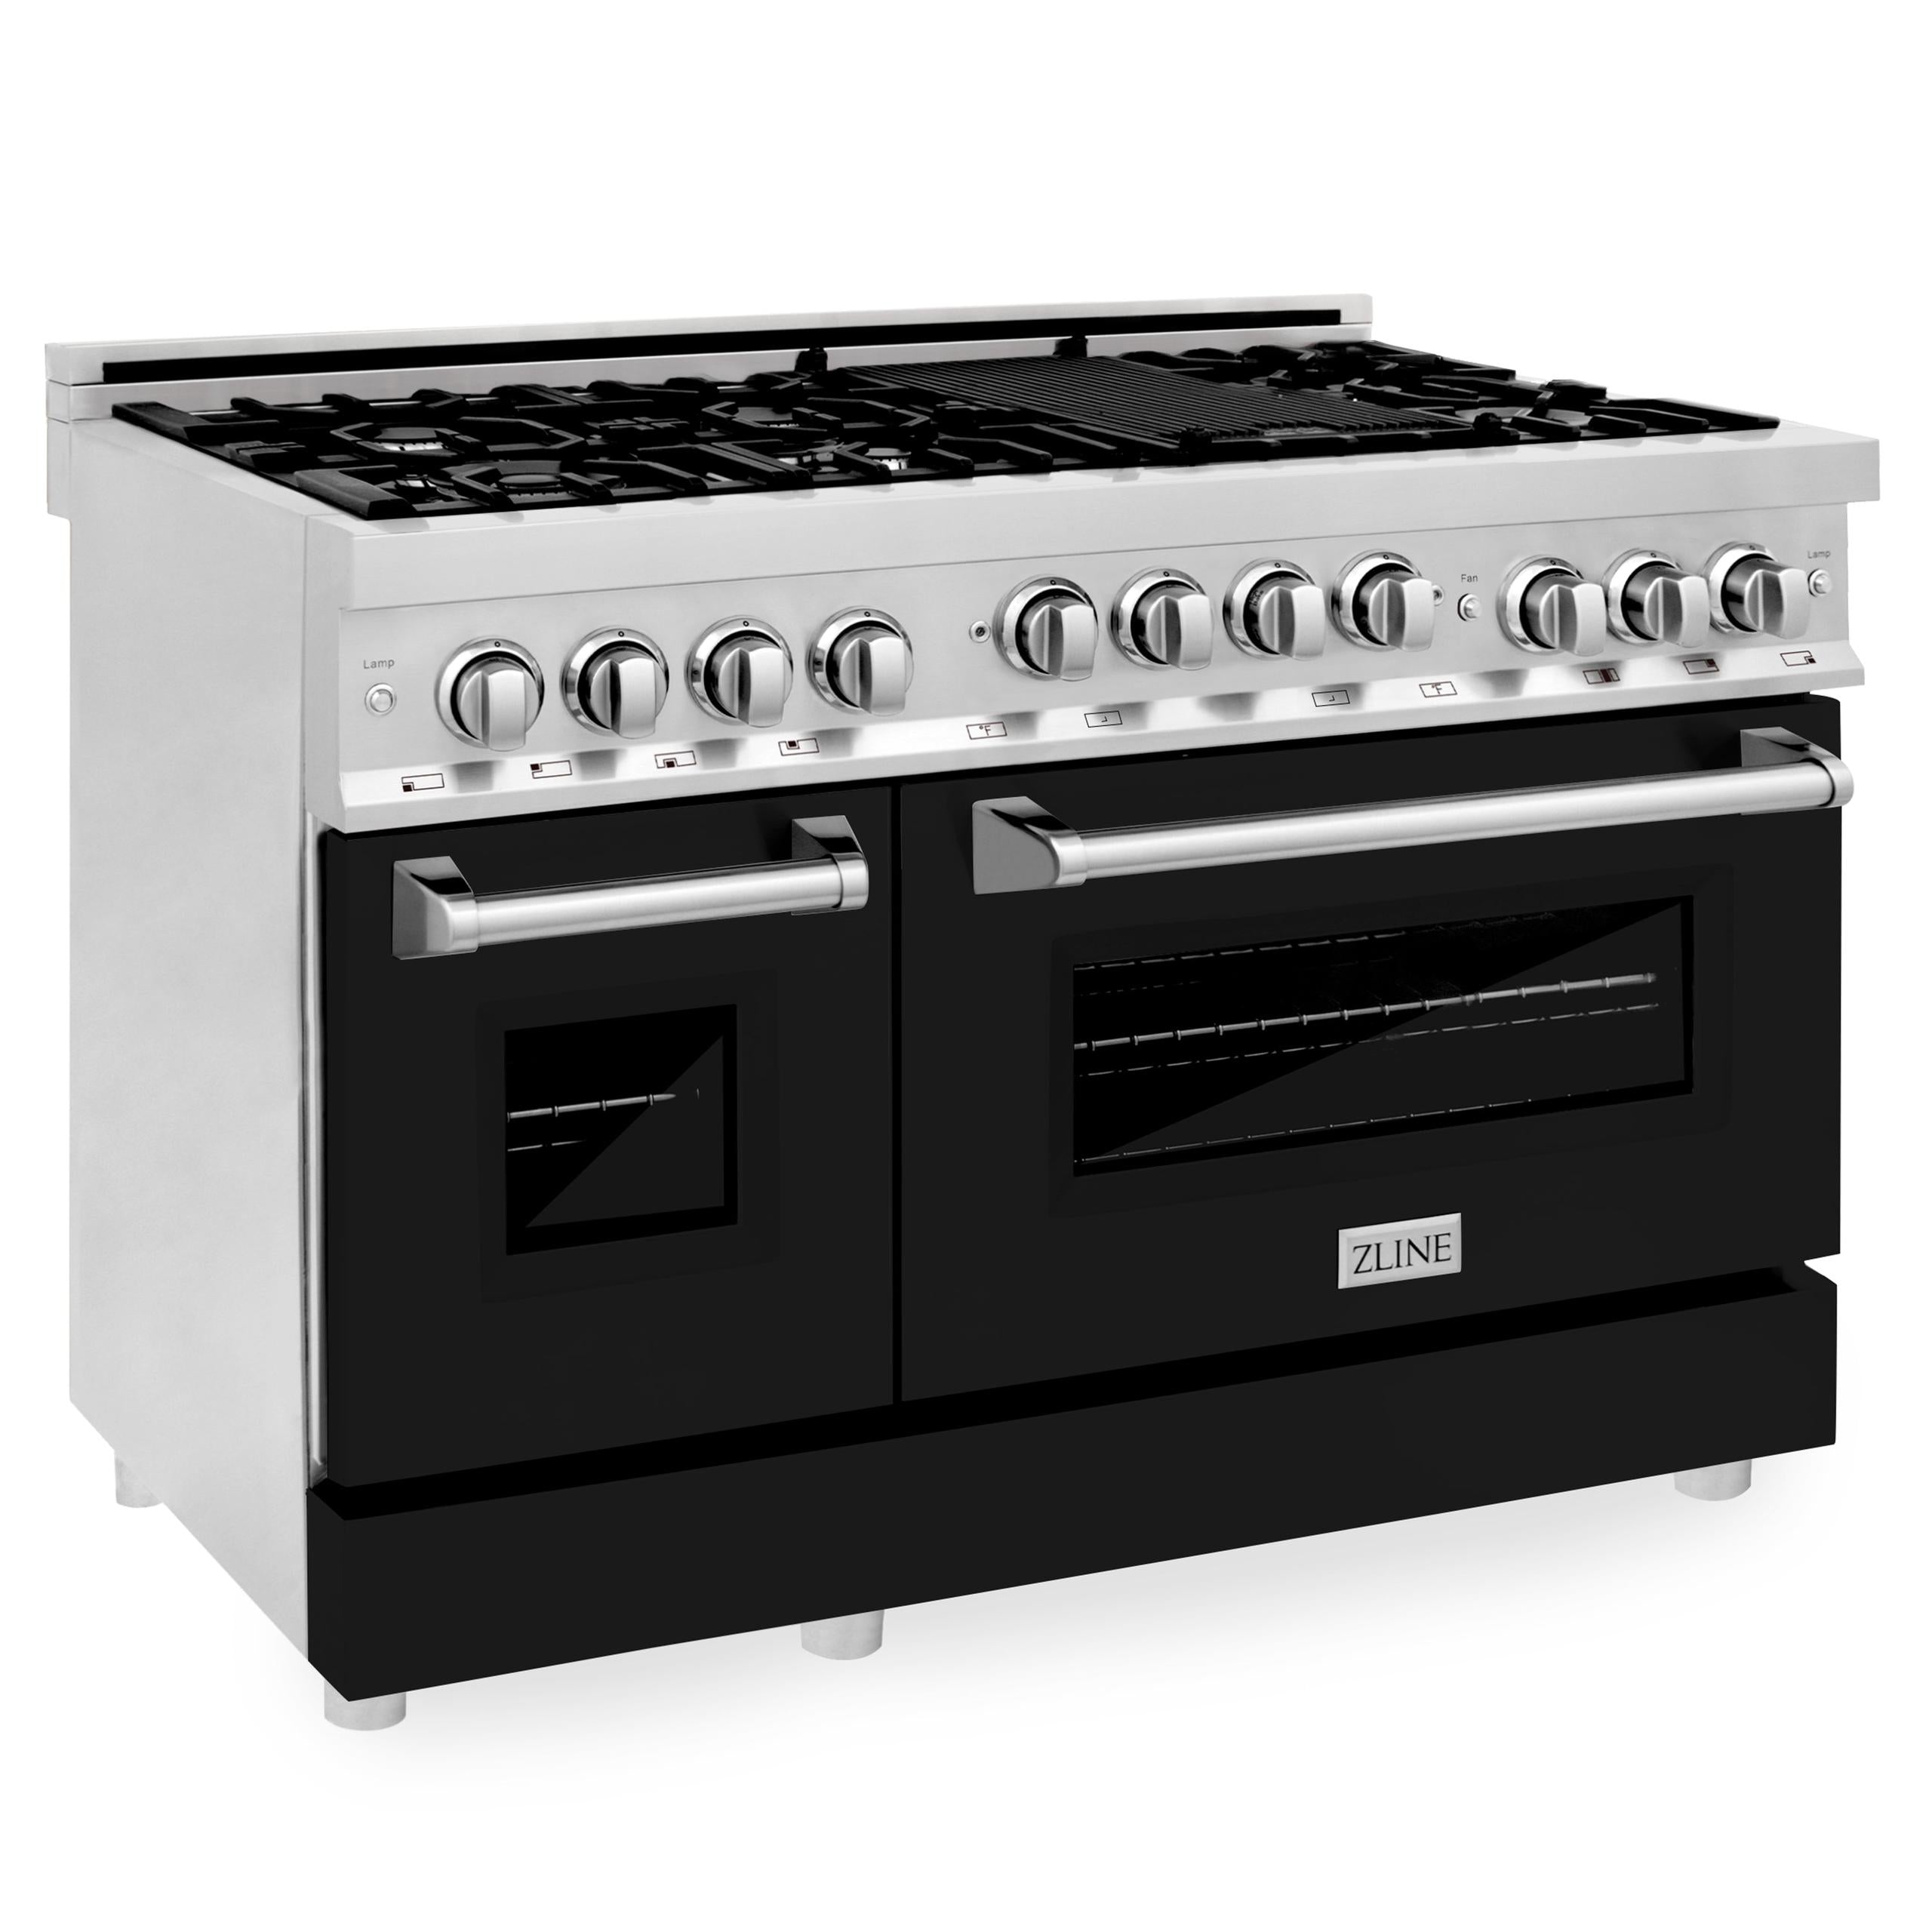 ZLINE KITCHEN AND BATH RGWM48 ZLINE 48" 6.0 cu. ft. Range with Gas Stove and Gas Oven in Stainless Steel Color: White Matte